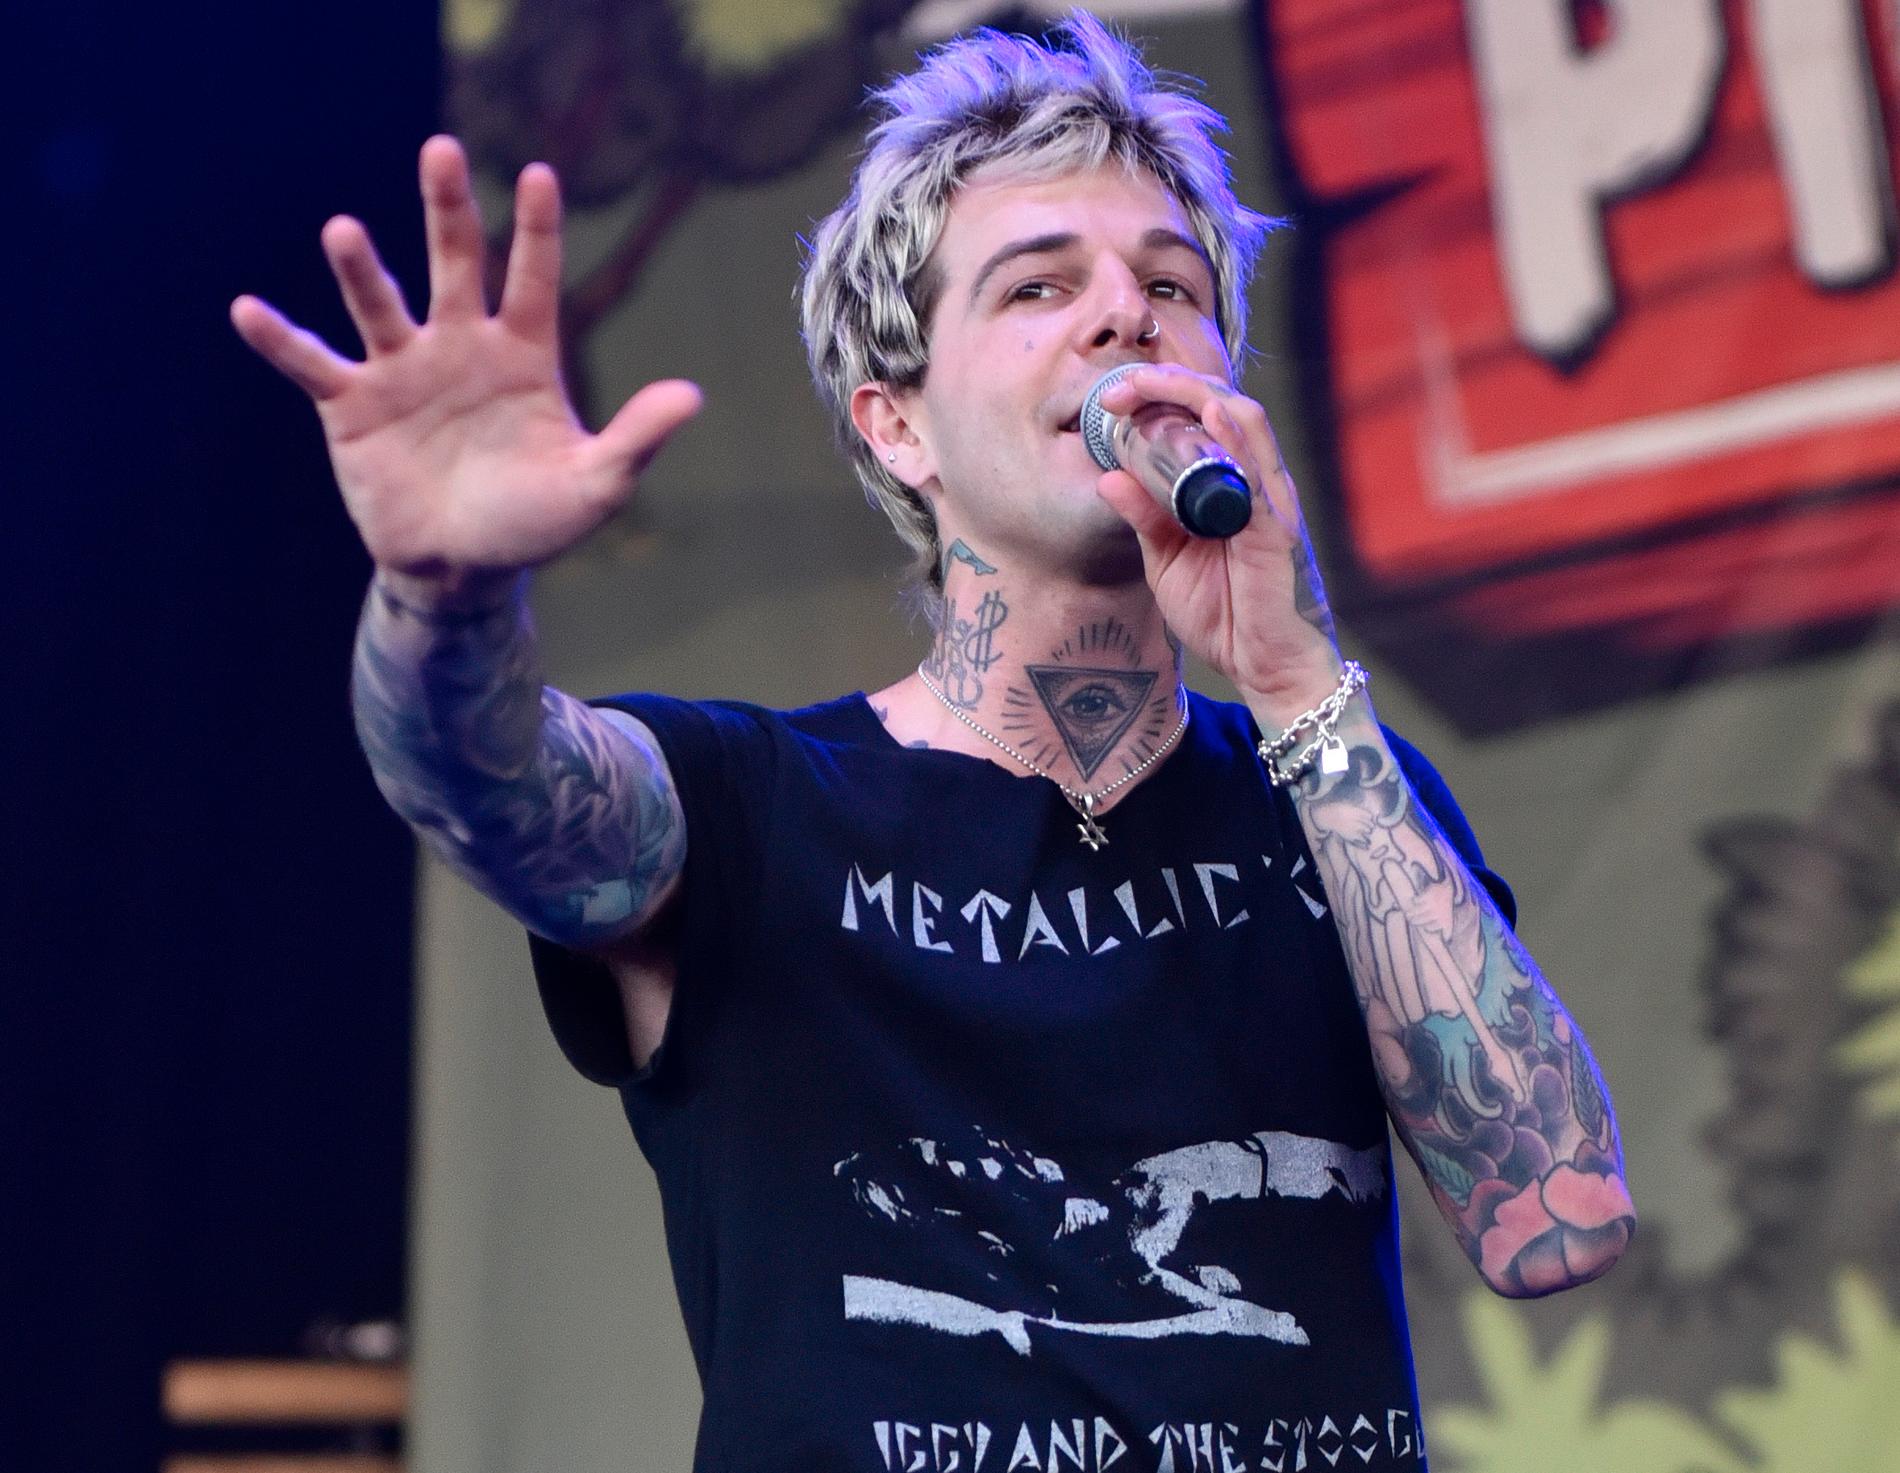 Jesse Rutherford.